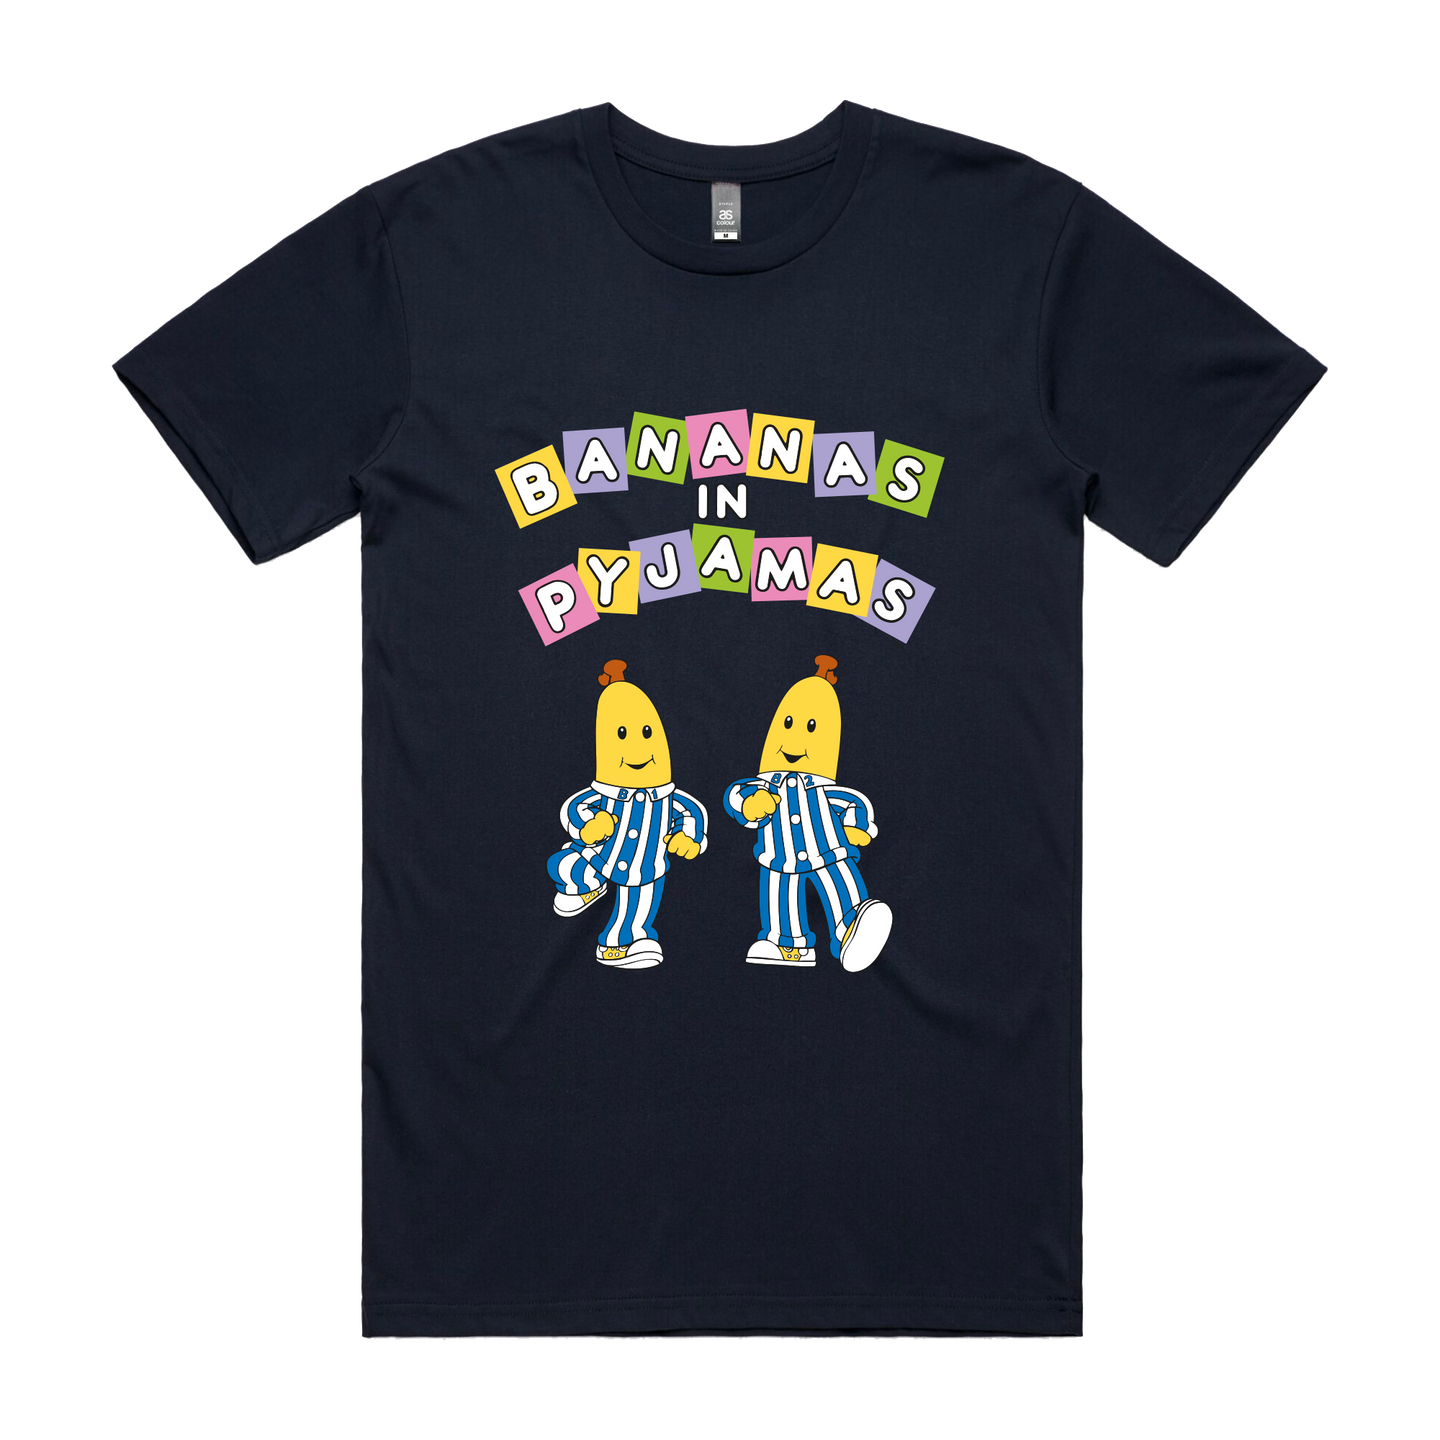 Navy Unisex T-Shirt with Bananas in Pyjamas Classic Design on Front